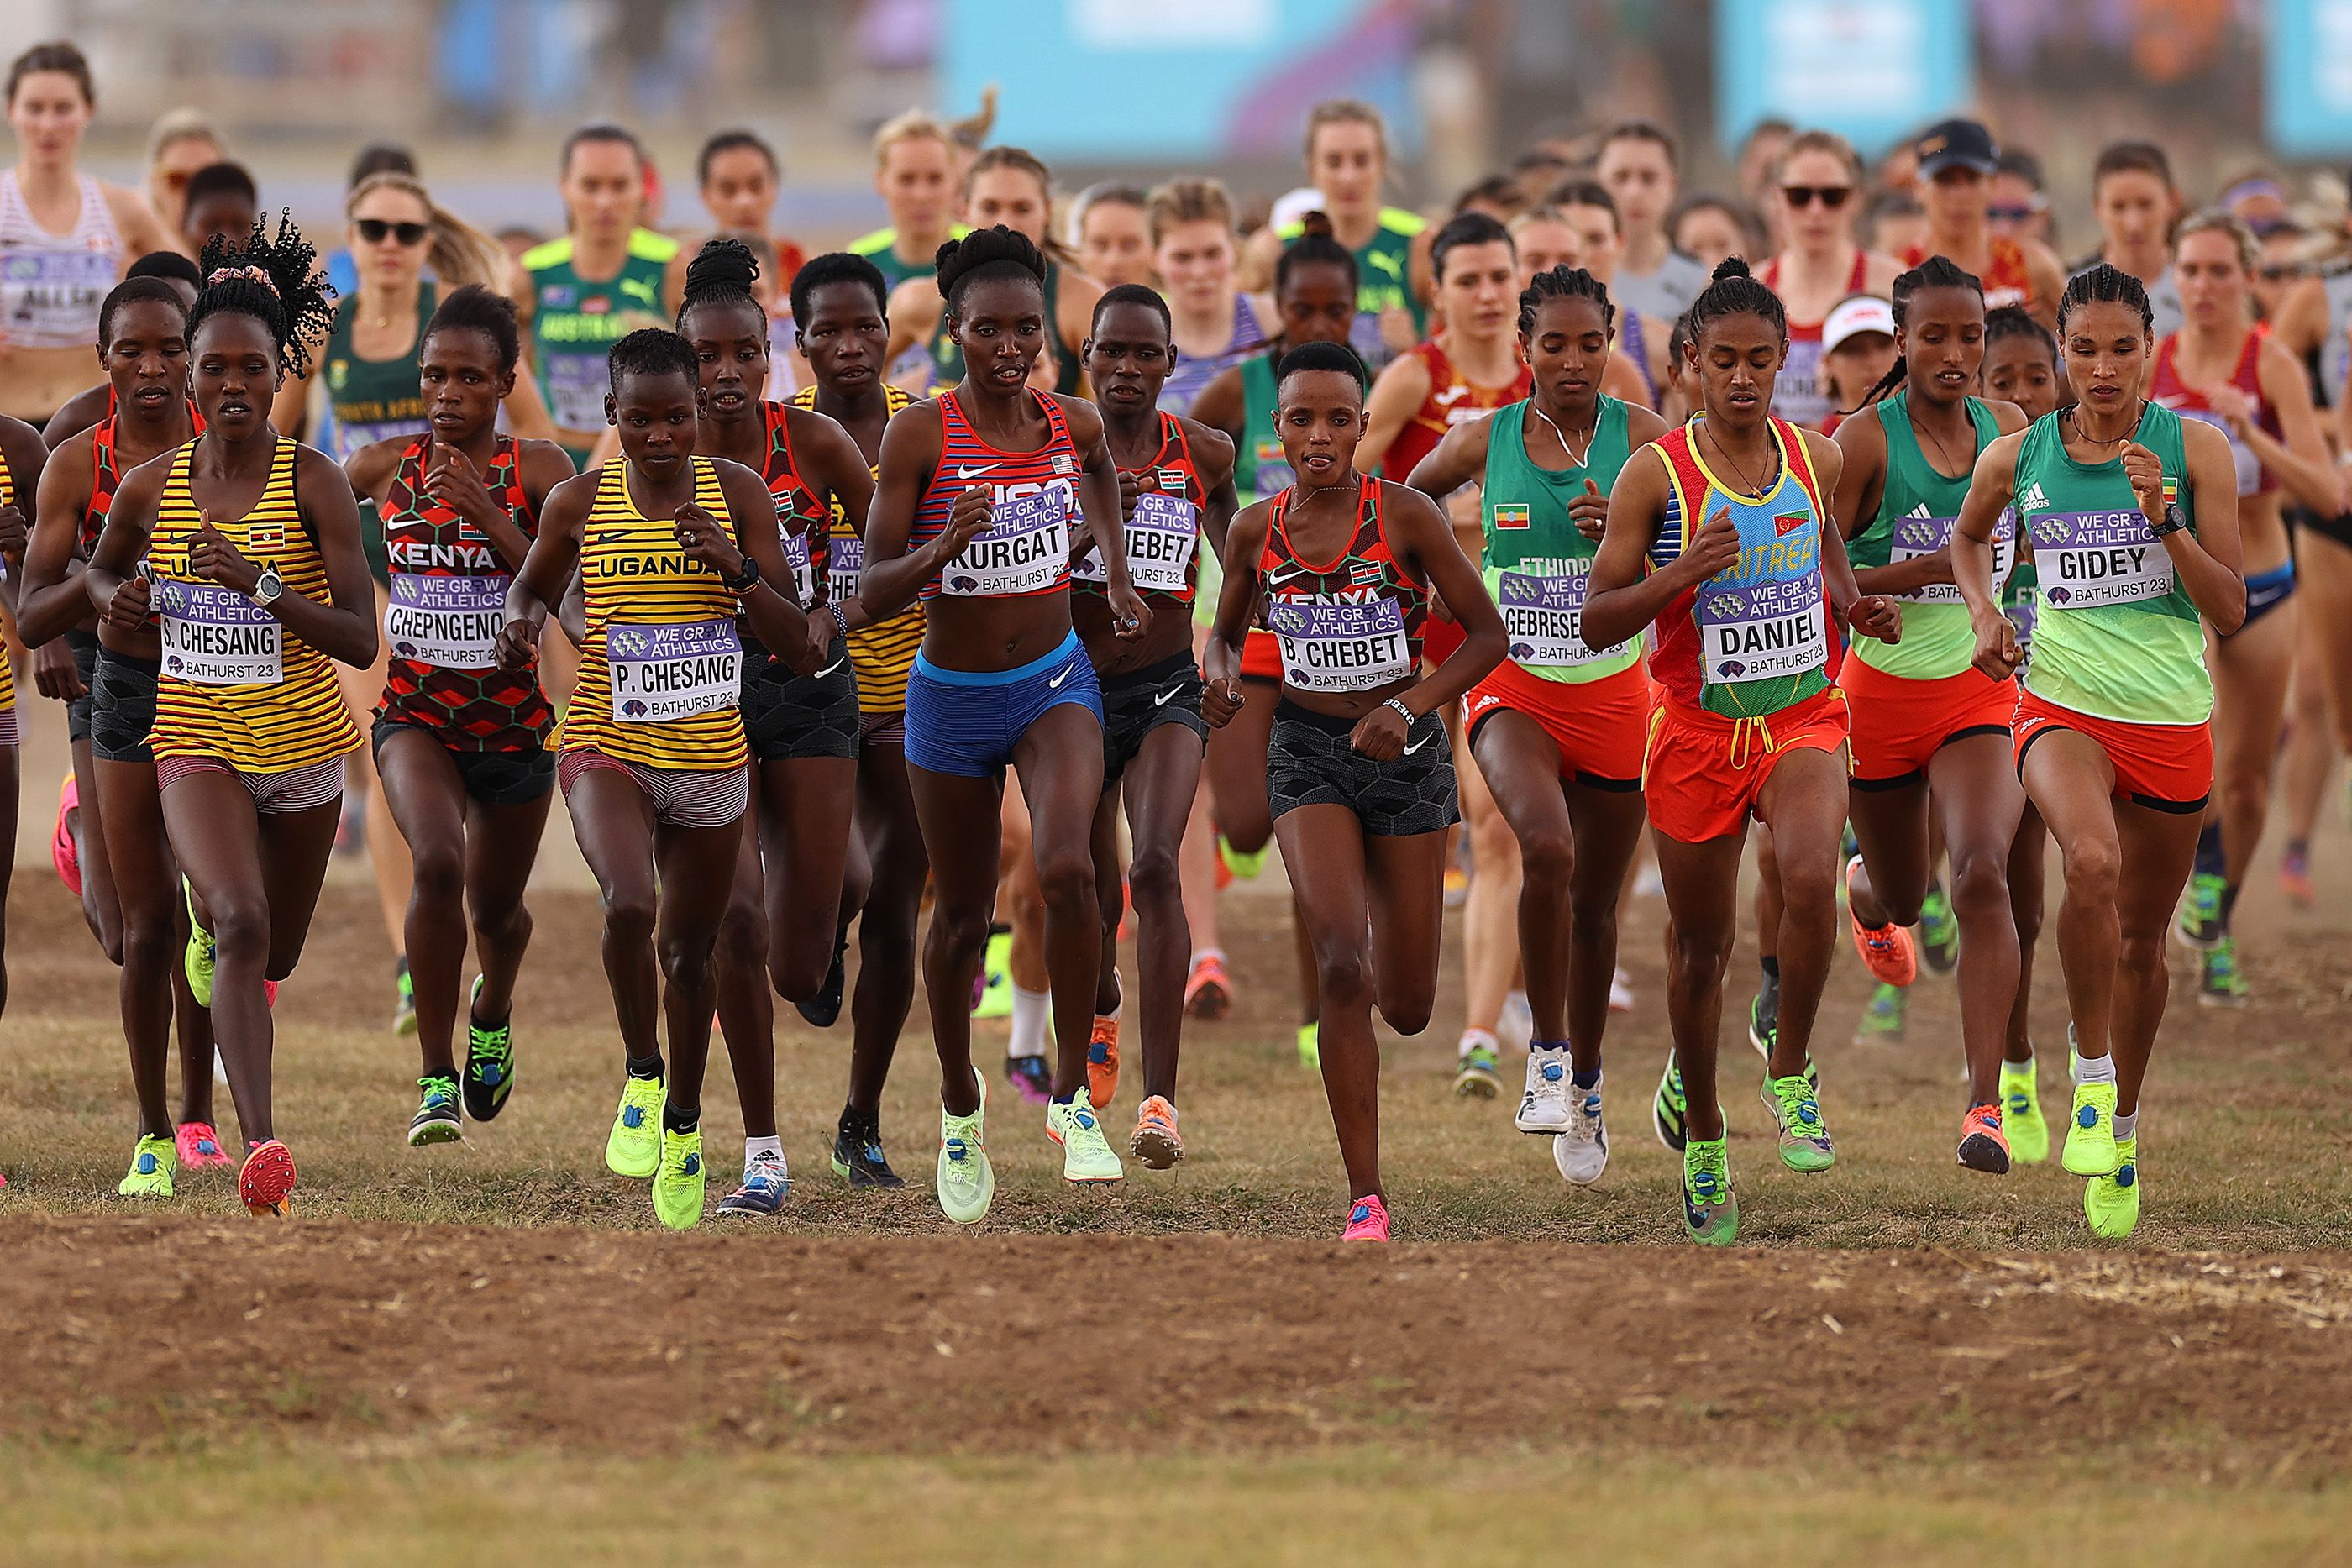 Athletes compete in the senior women's race at the World Cross Country Championships in Bathurst